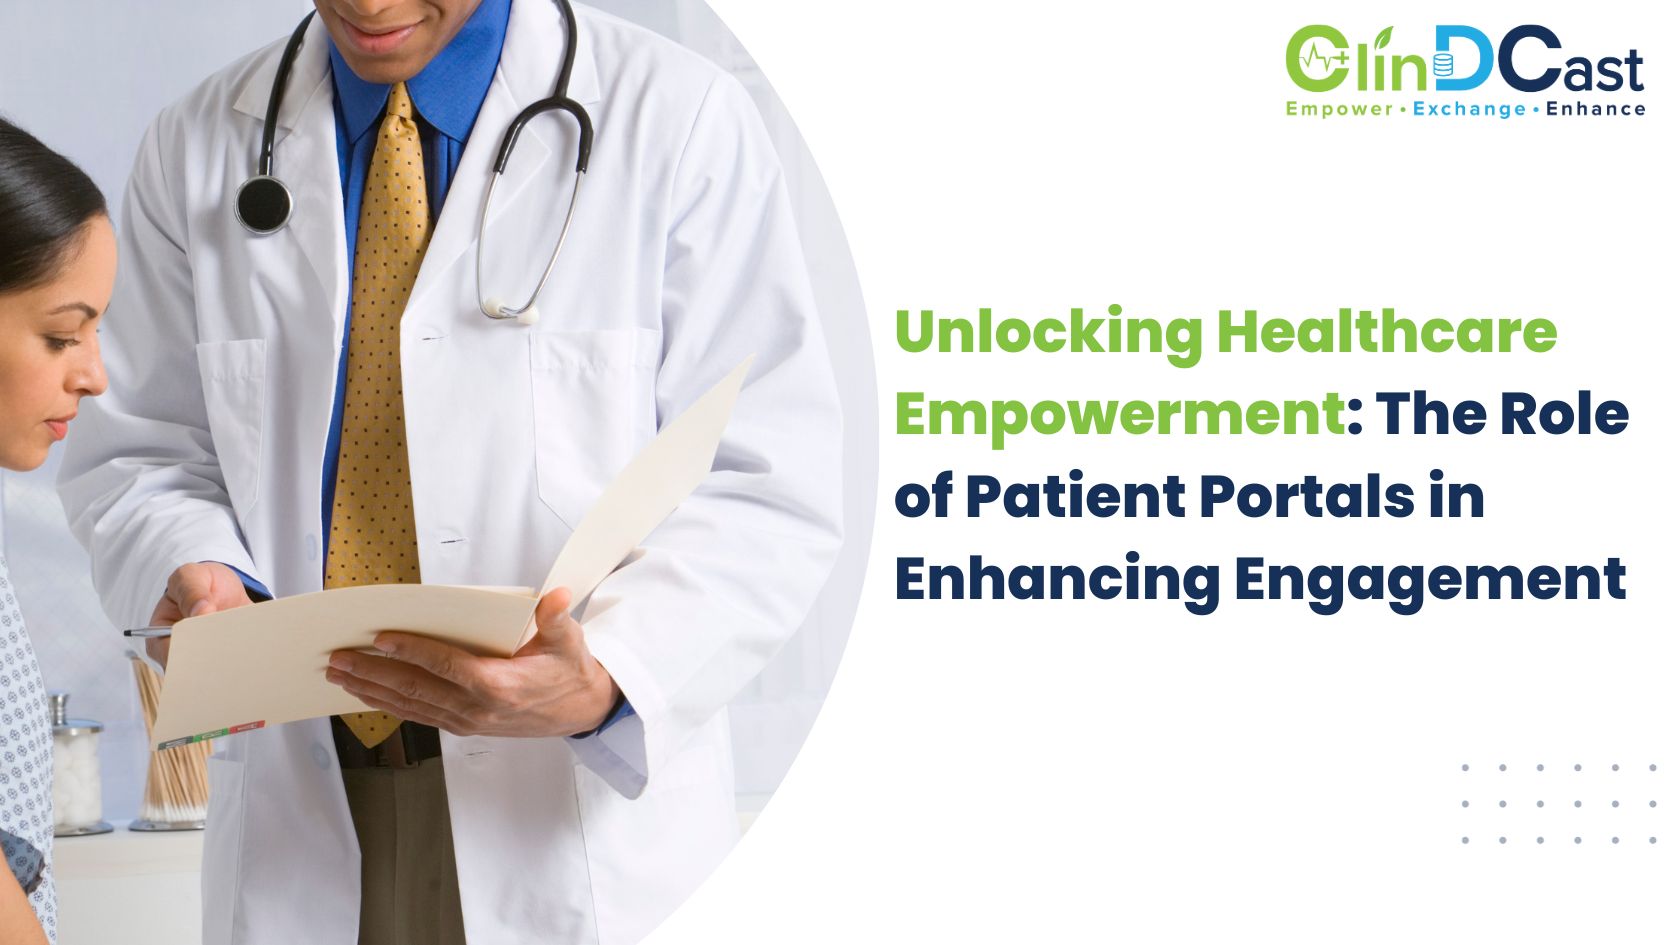 Unlocking Healthcare Empowerment: The Role of Patient Portals in Enhancing Engagement